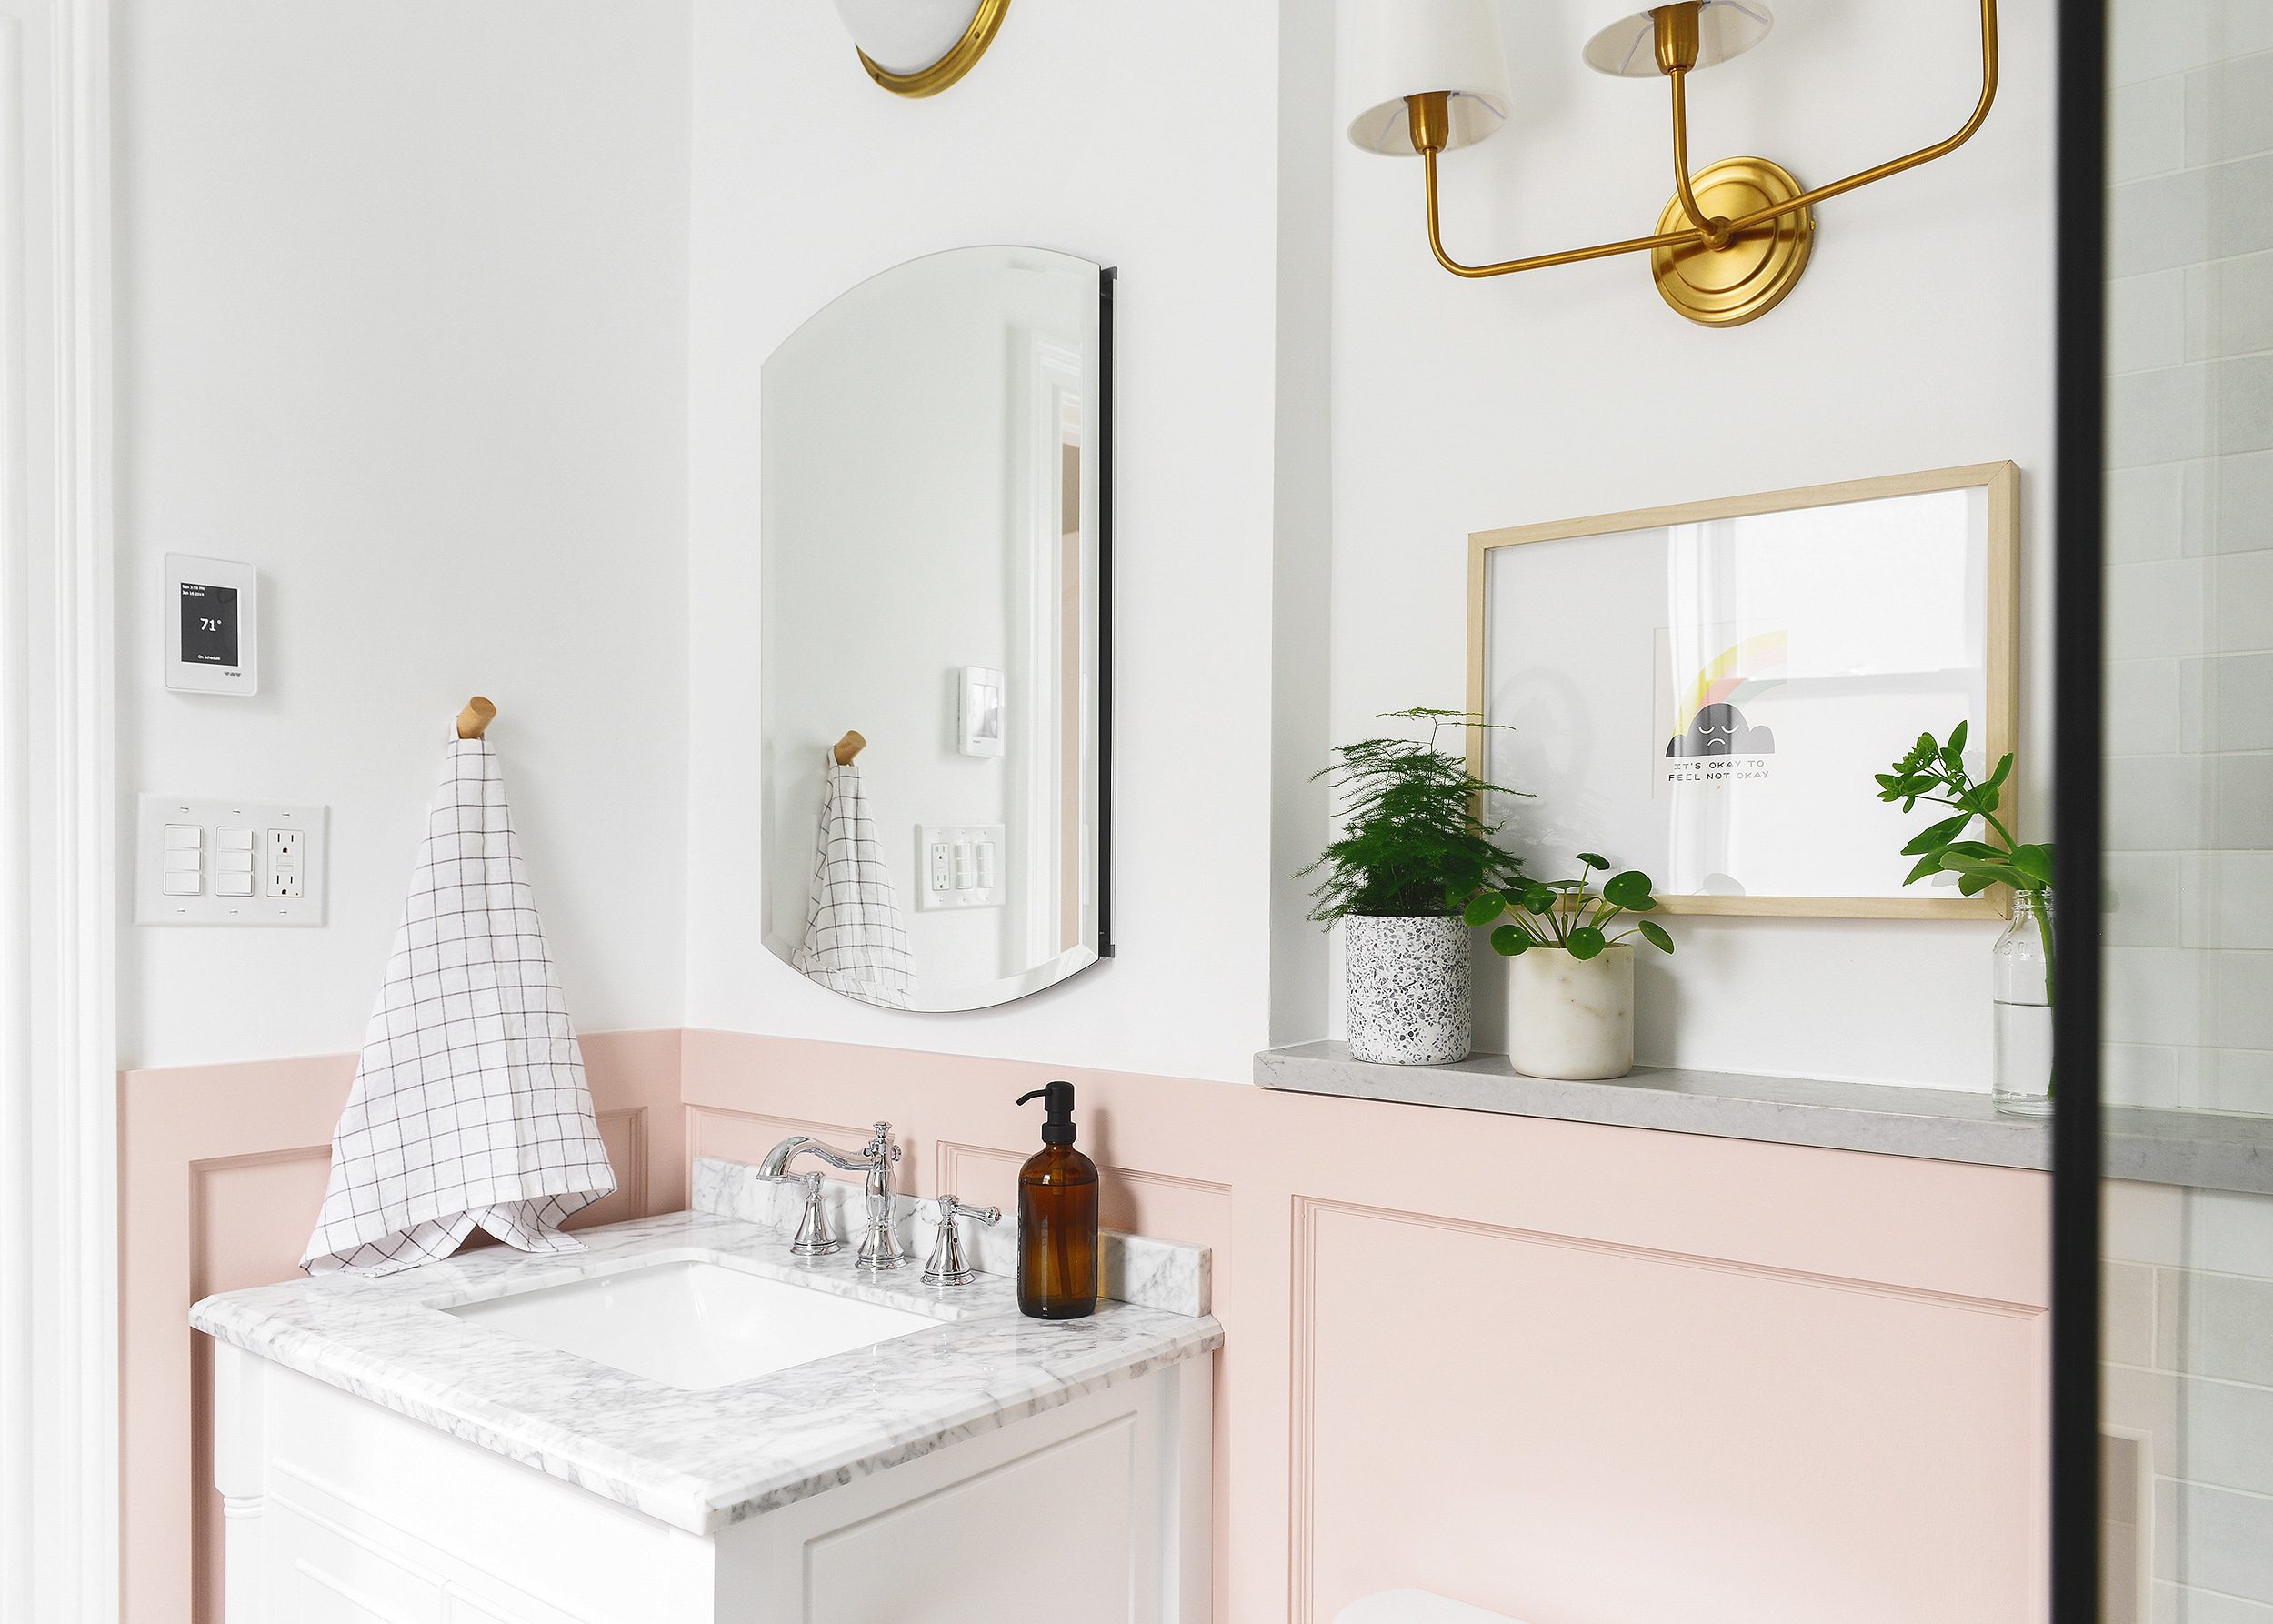 A pink and white bathroom with brass accents | art in a bathroom | round-up of 19 works of art that would look good in a bathroom, via Yellow Brick Home